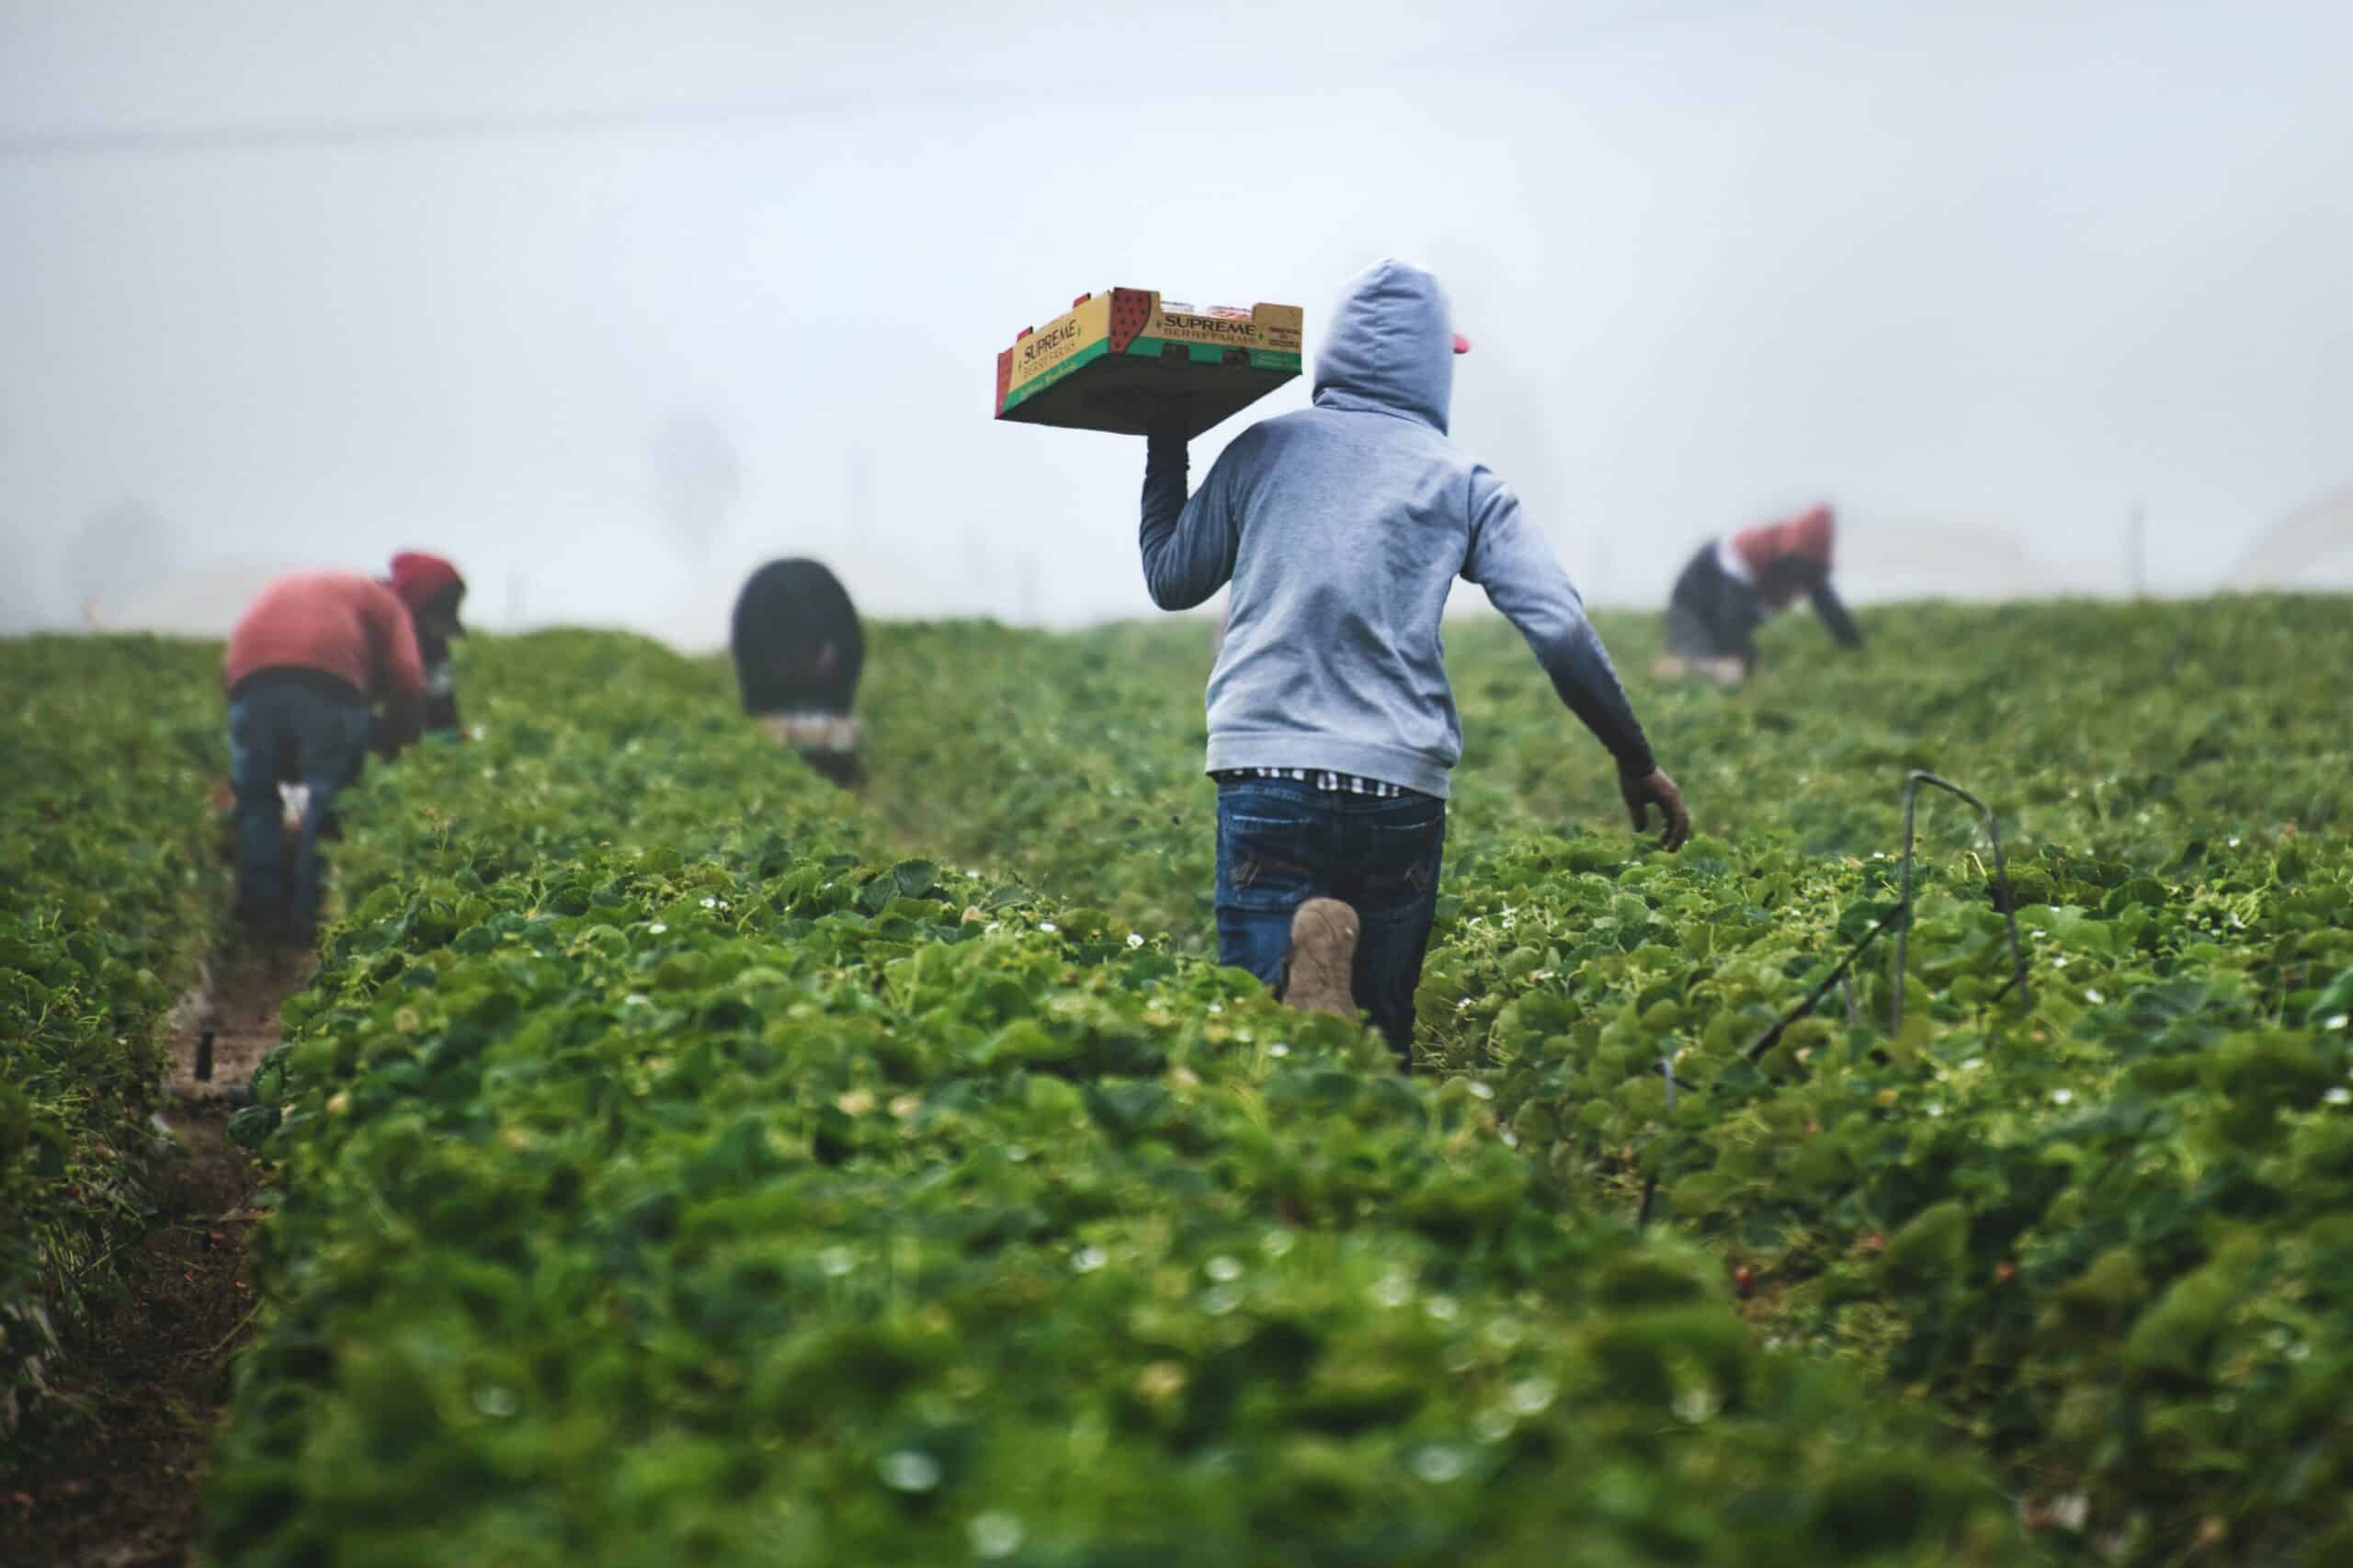 Person farming in field representing temporary foreign workers